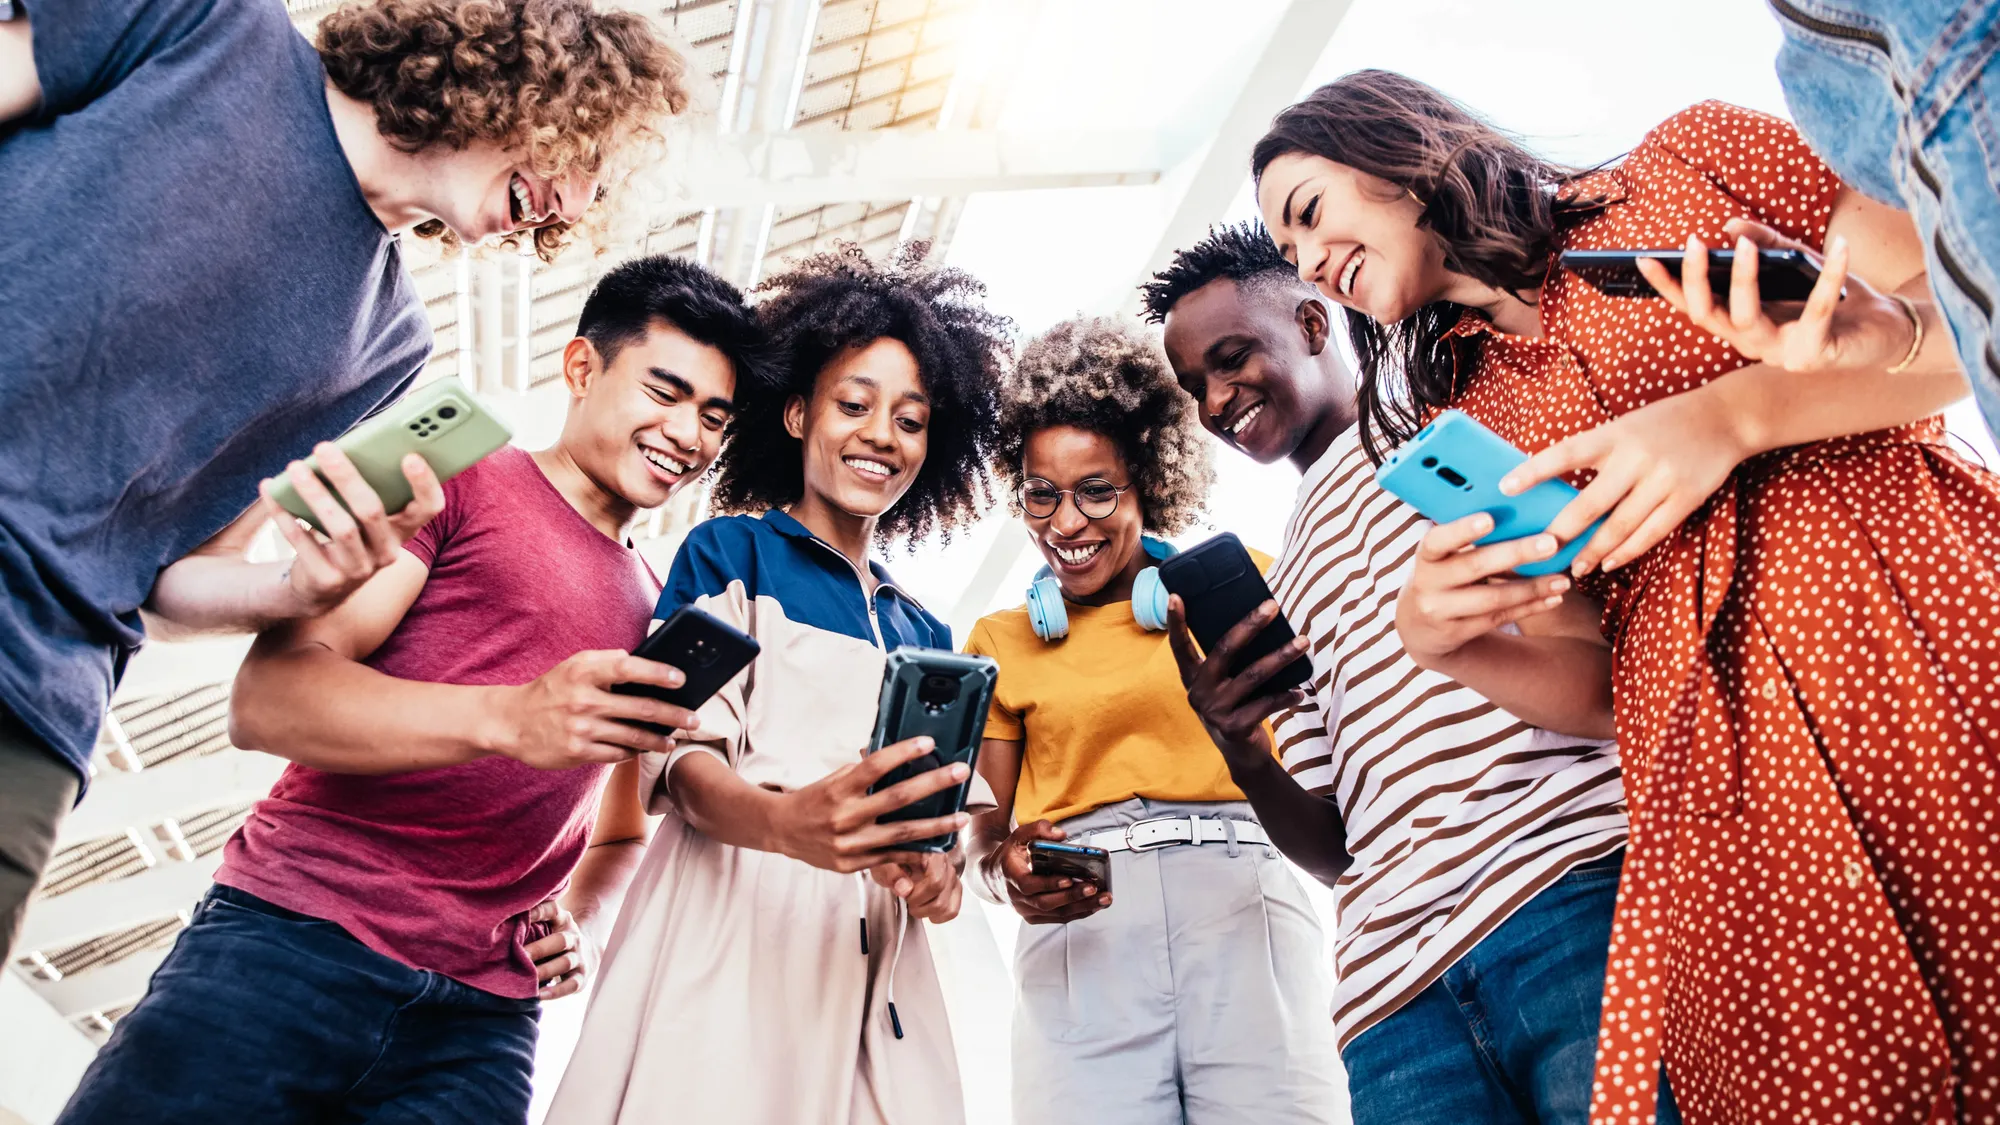 Diverse teenage students using digital smart mobile phones on college campus - Group of friends watching cellphones sharing content on social media platform.